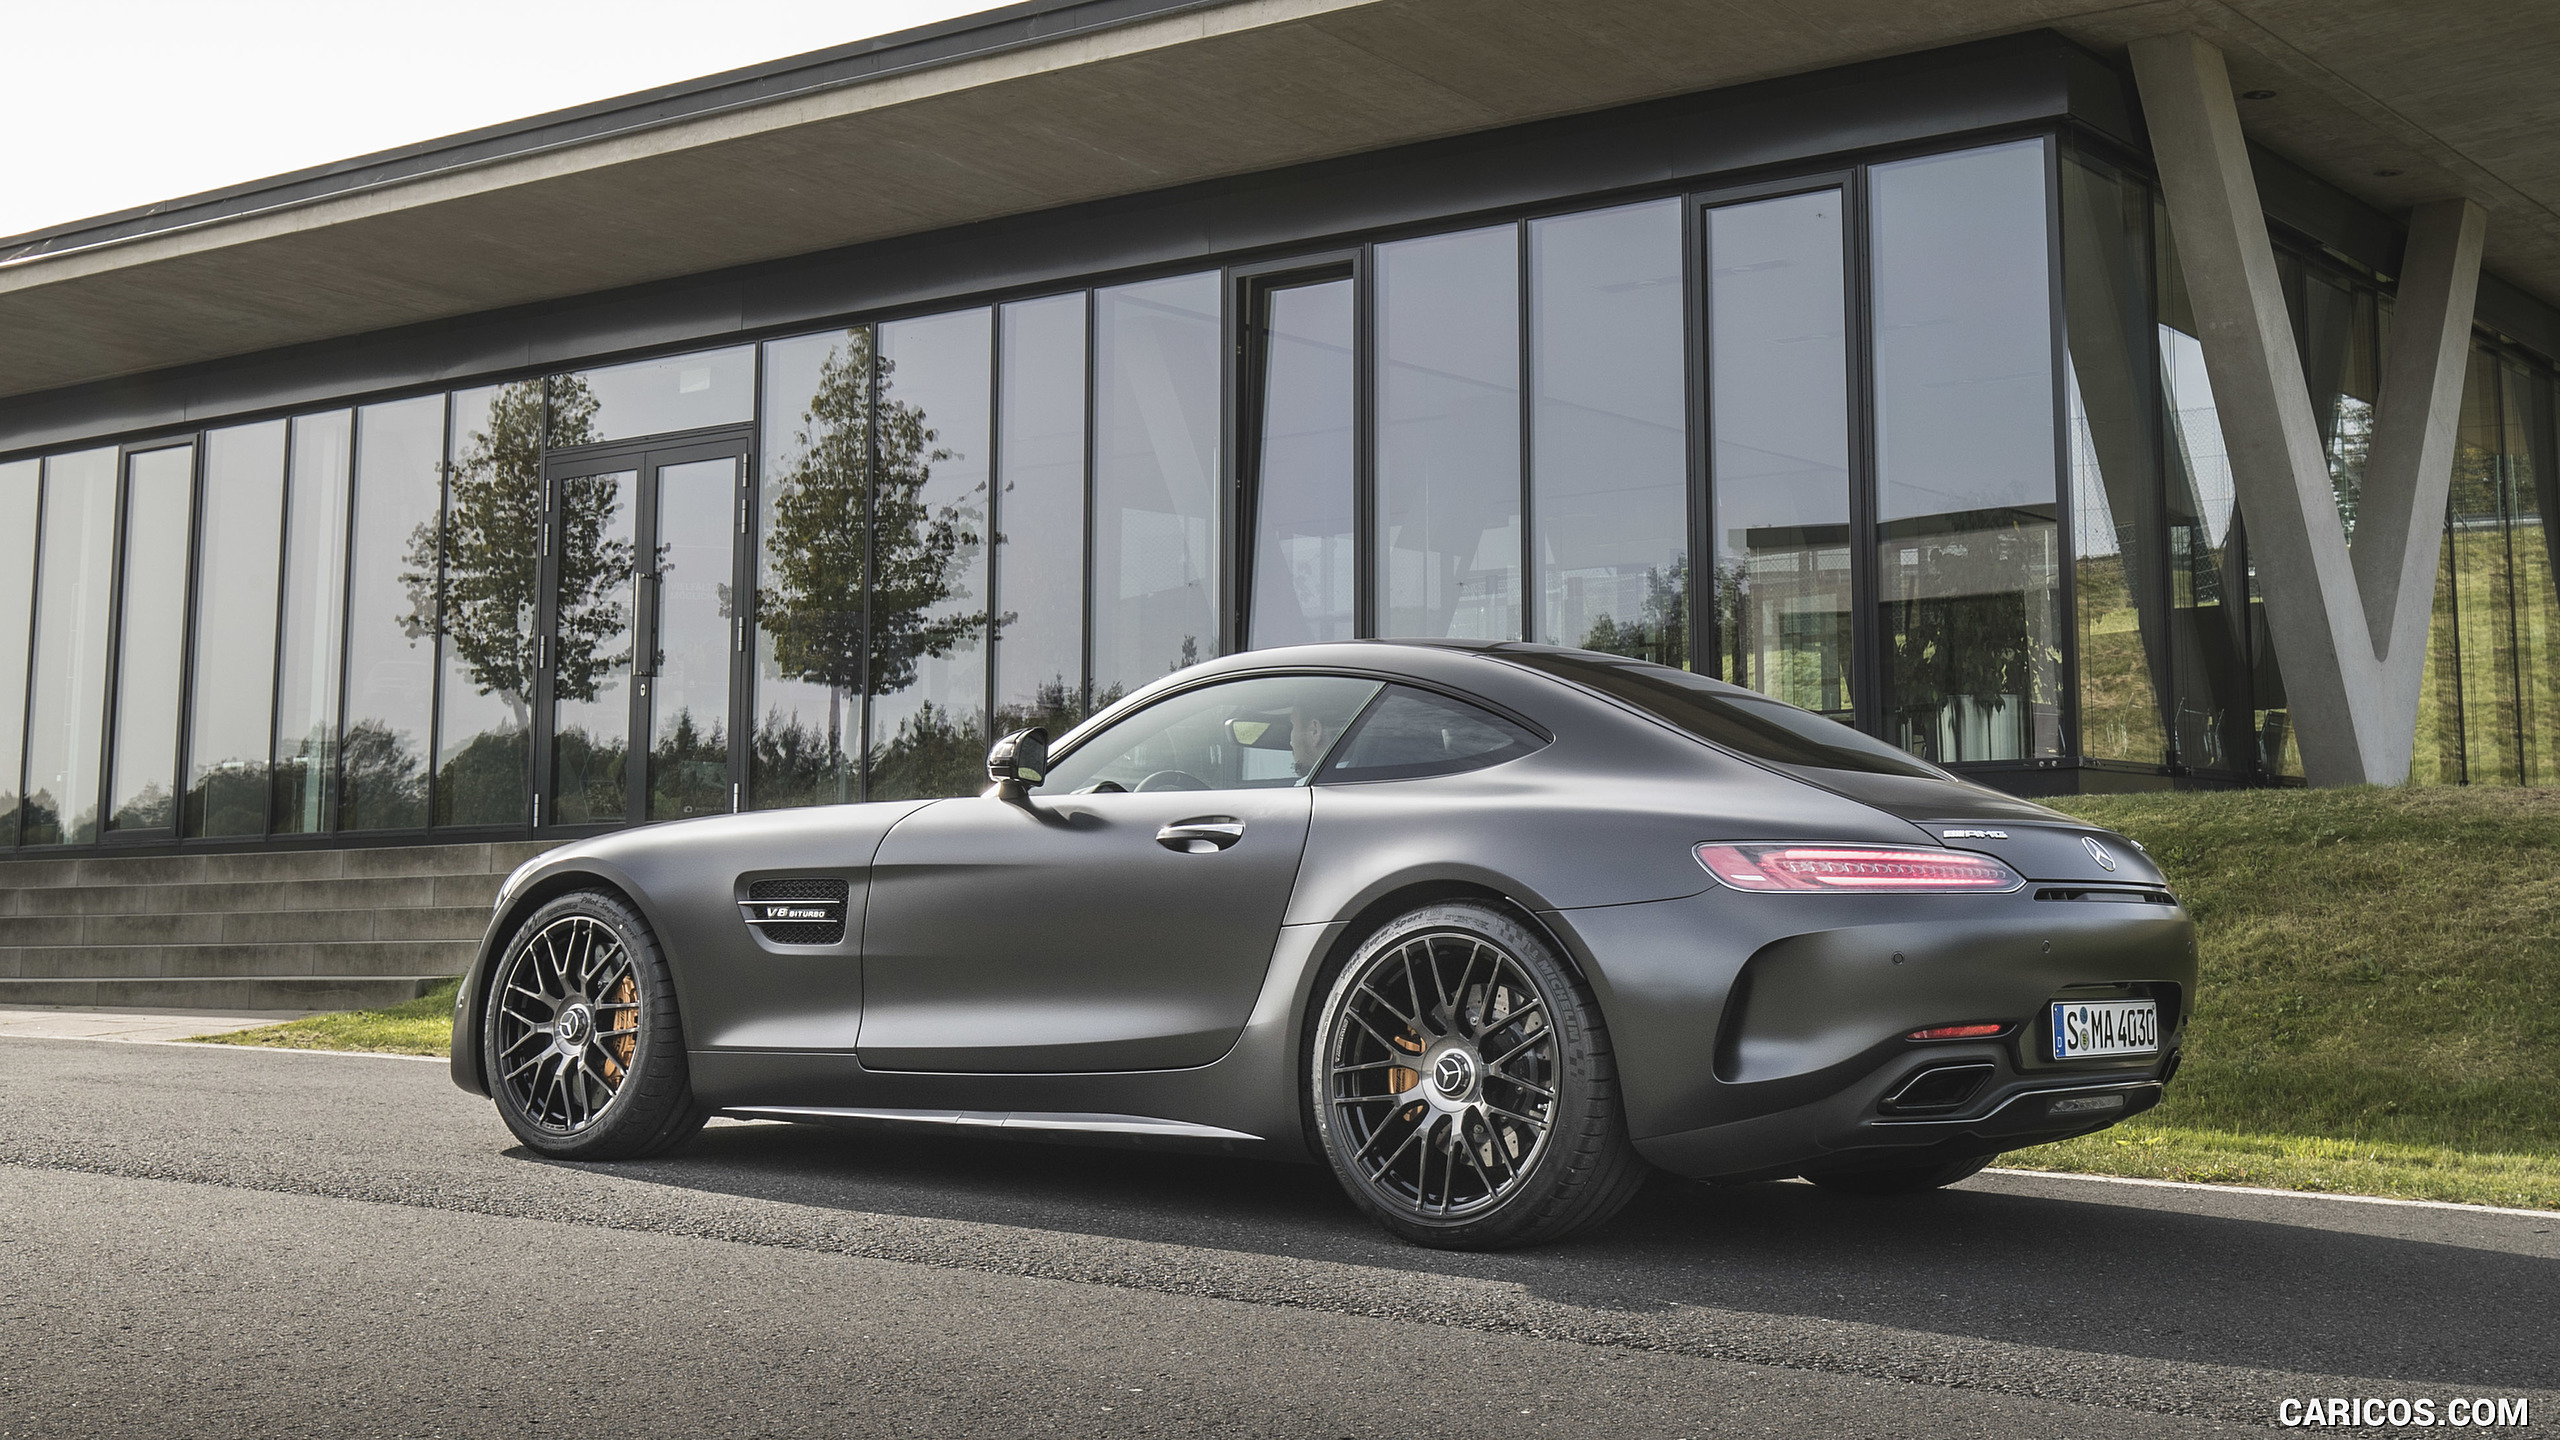 2018 Mercedes-AMG GT C Coupe Edition 50 - Rear Three-Quarter, #23 of 70